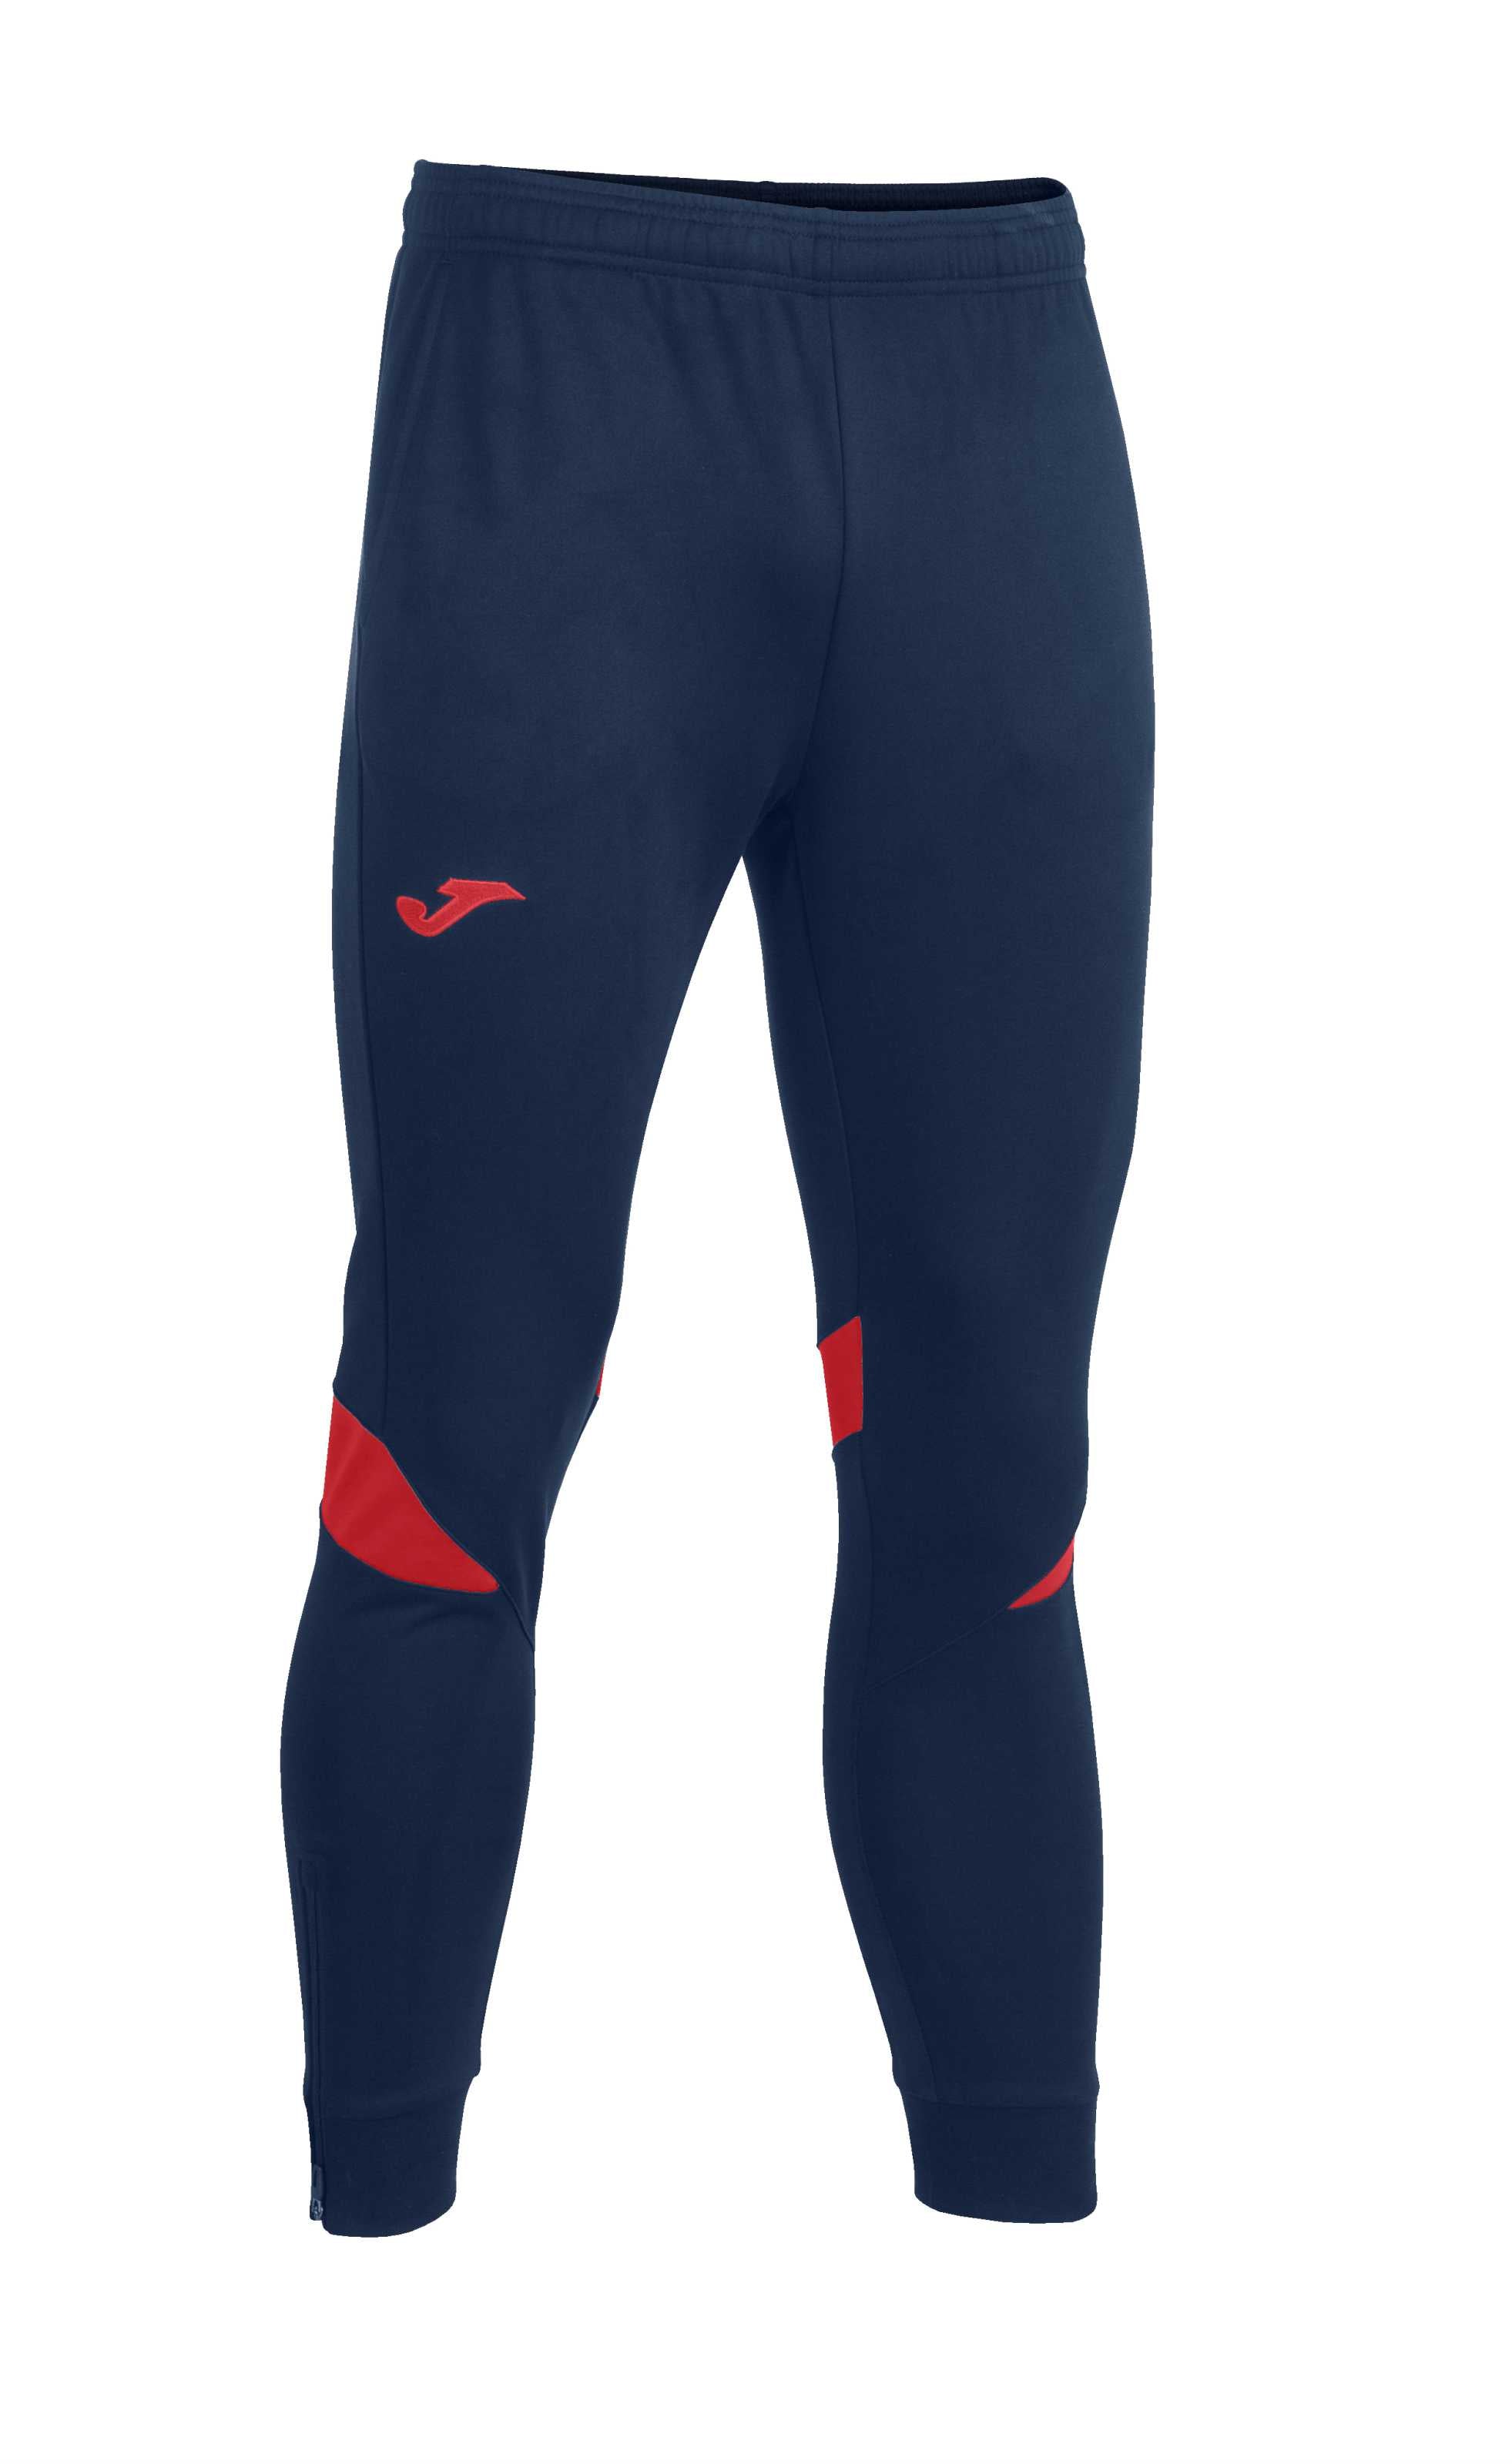 Poppies Player - Joma Championship VI Long Pant - Navy/Red